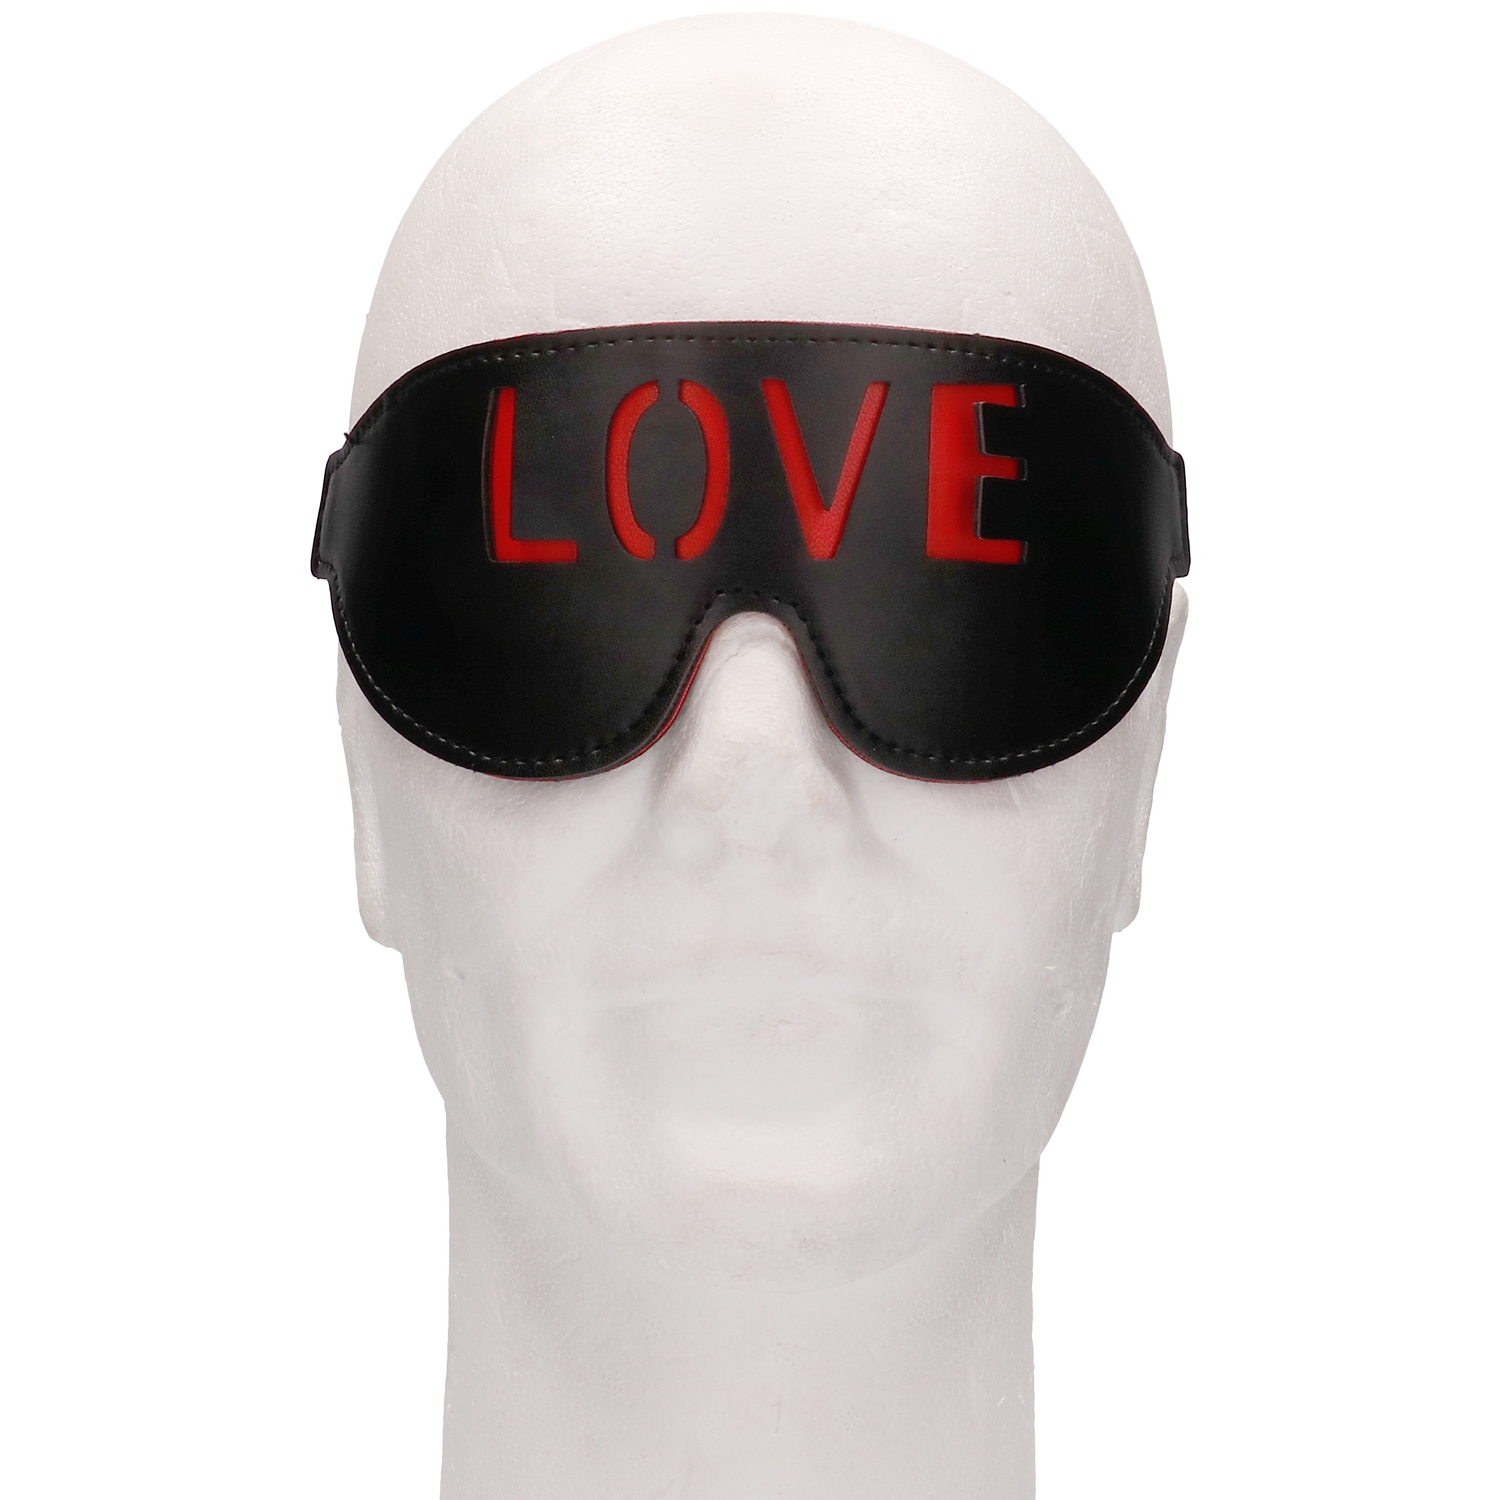 Ouch! Love Blindfold - Black